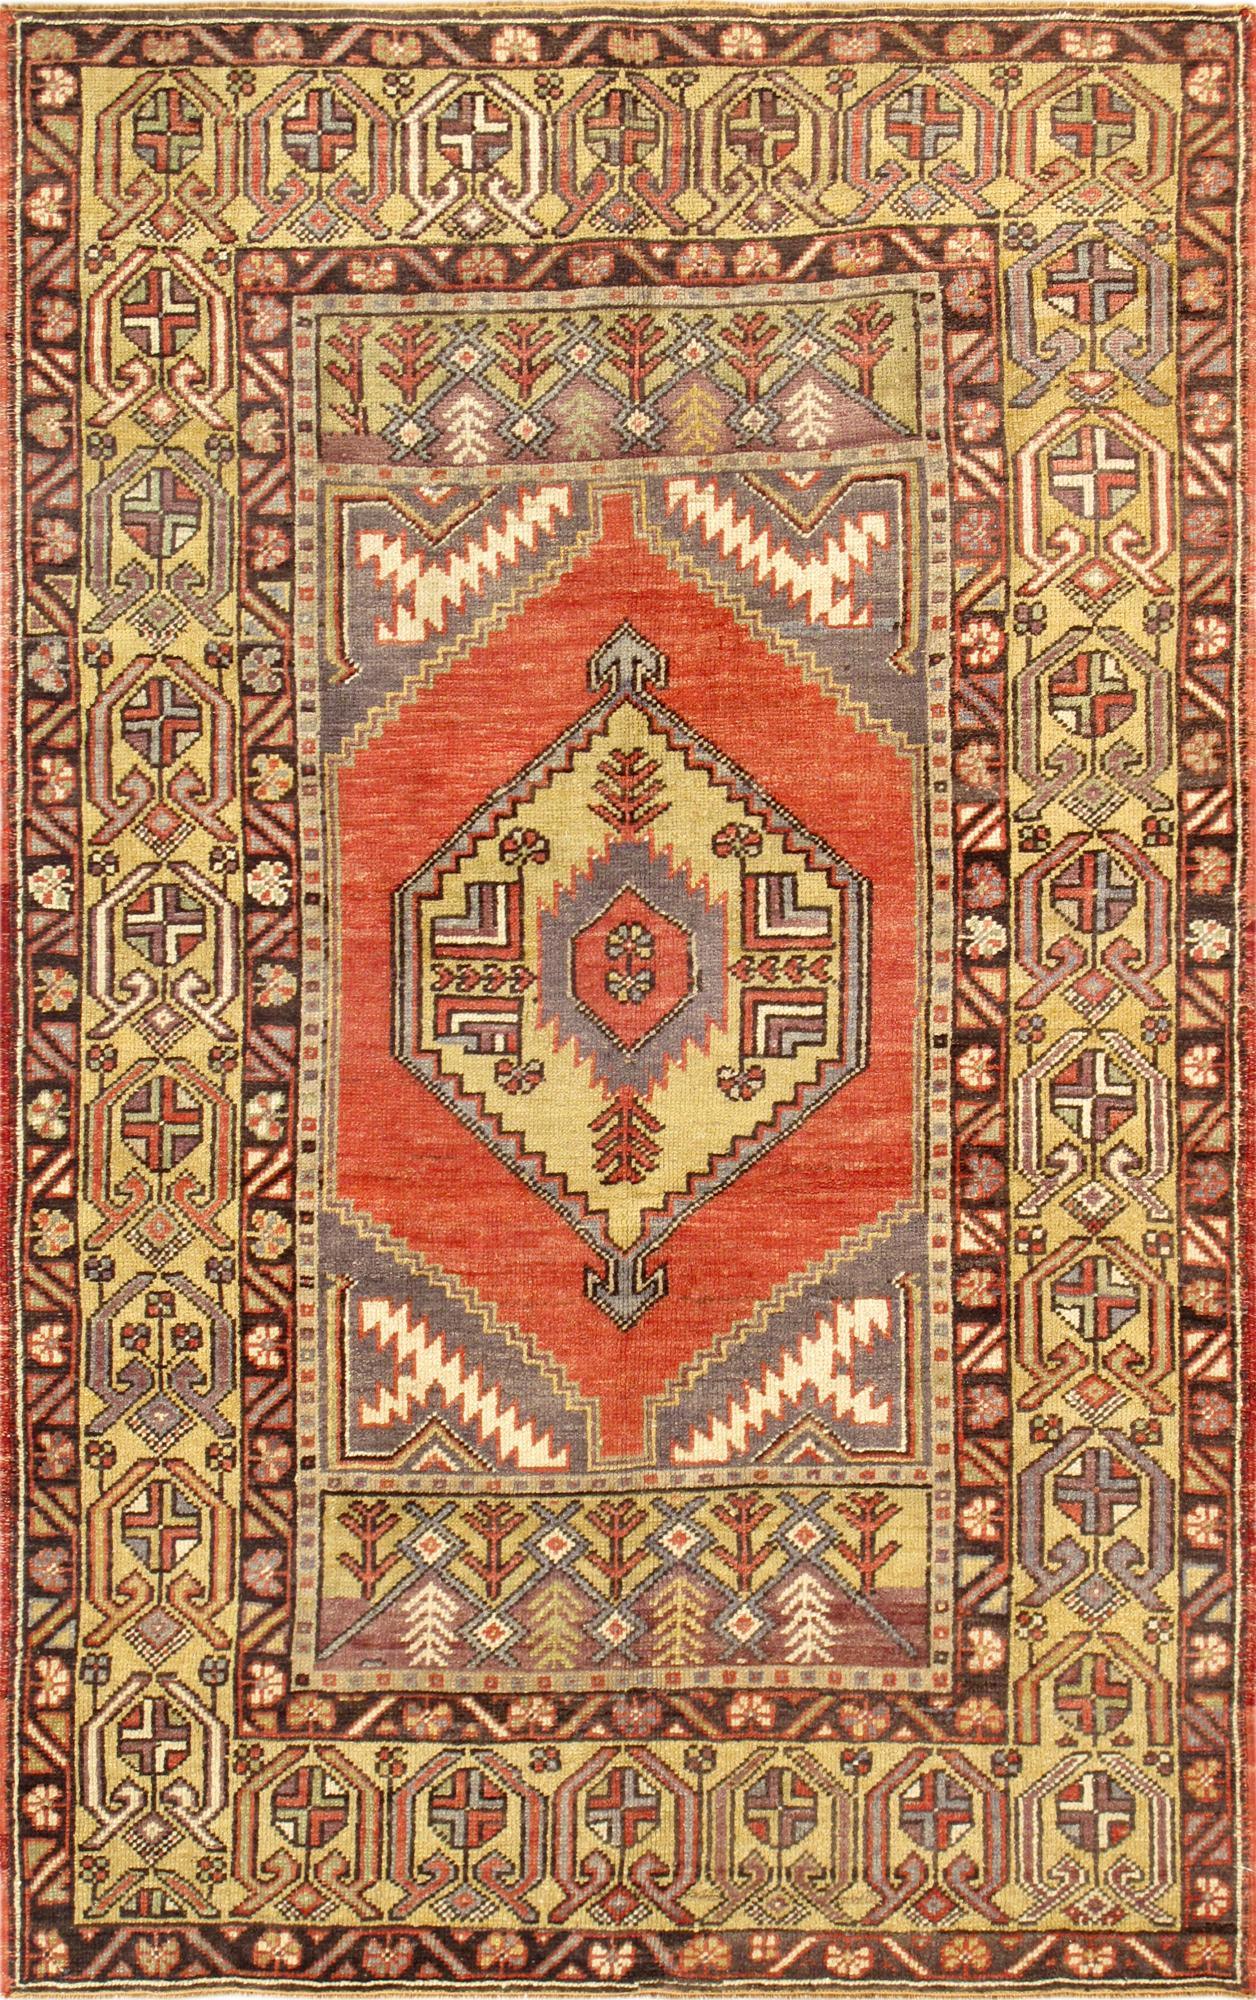 Canvello Vintage Oushak Coral Lamb's Wool Area Rug- 3'7" X 5'10"